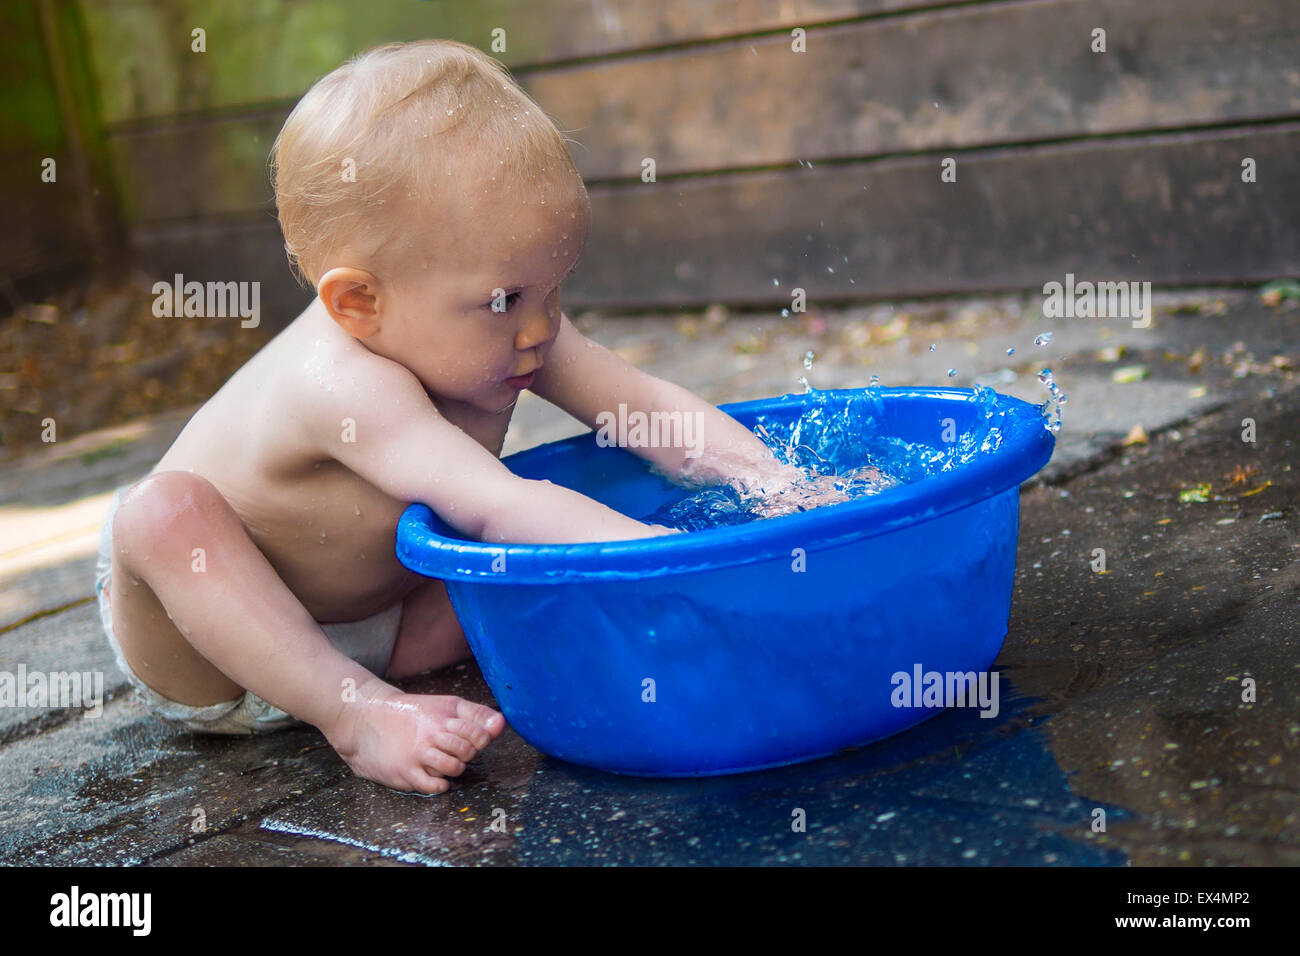 Cute baby playing with a tub of water Stock Photo